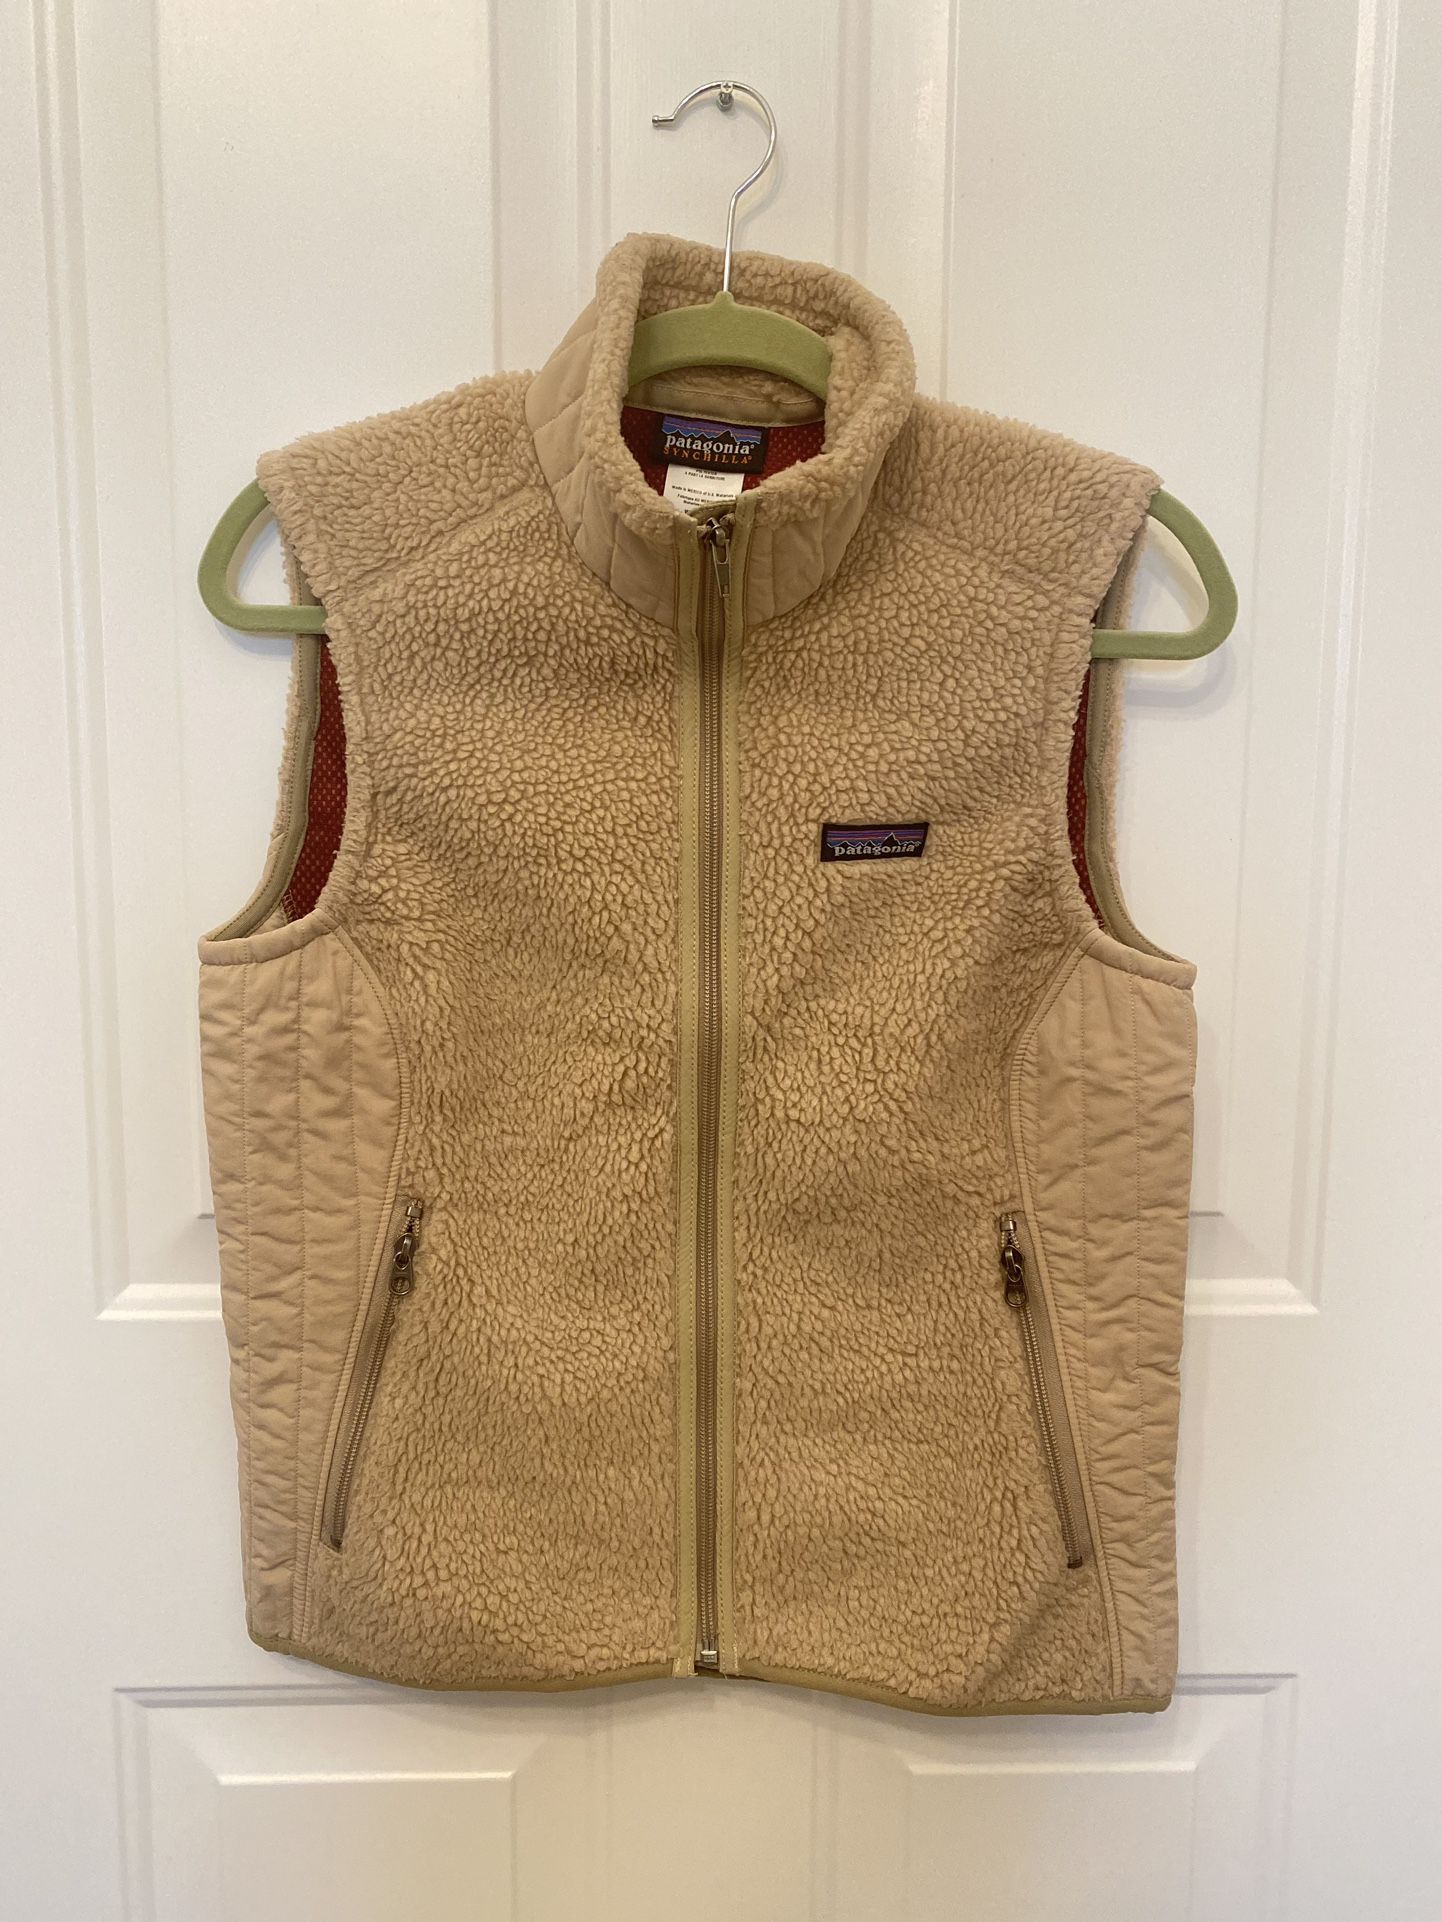 Patagonia Vest Woman Small